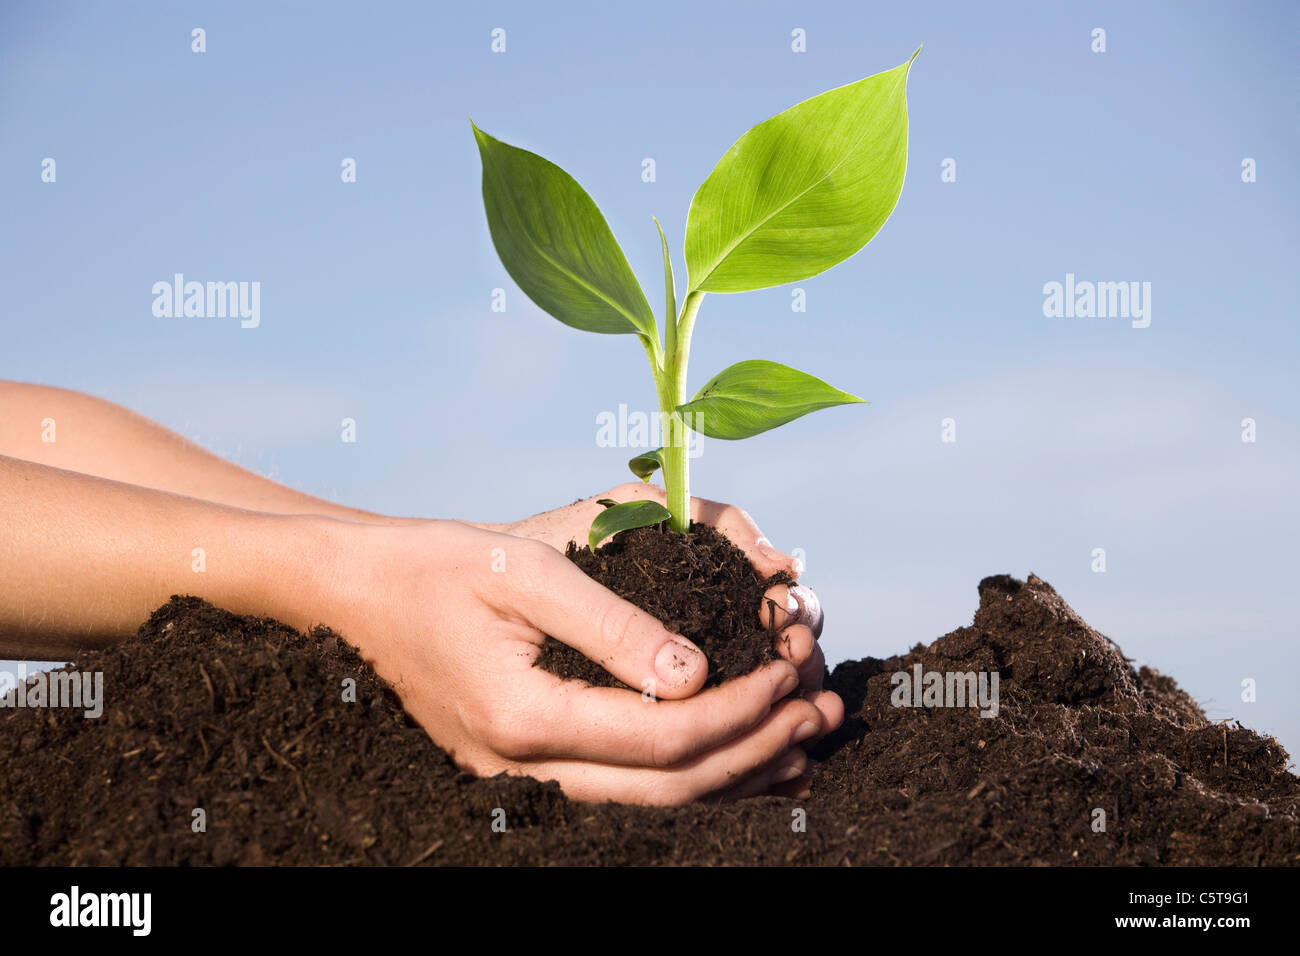 Person planting Banana plant in soil, close-up Stock Photo